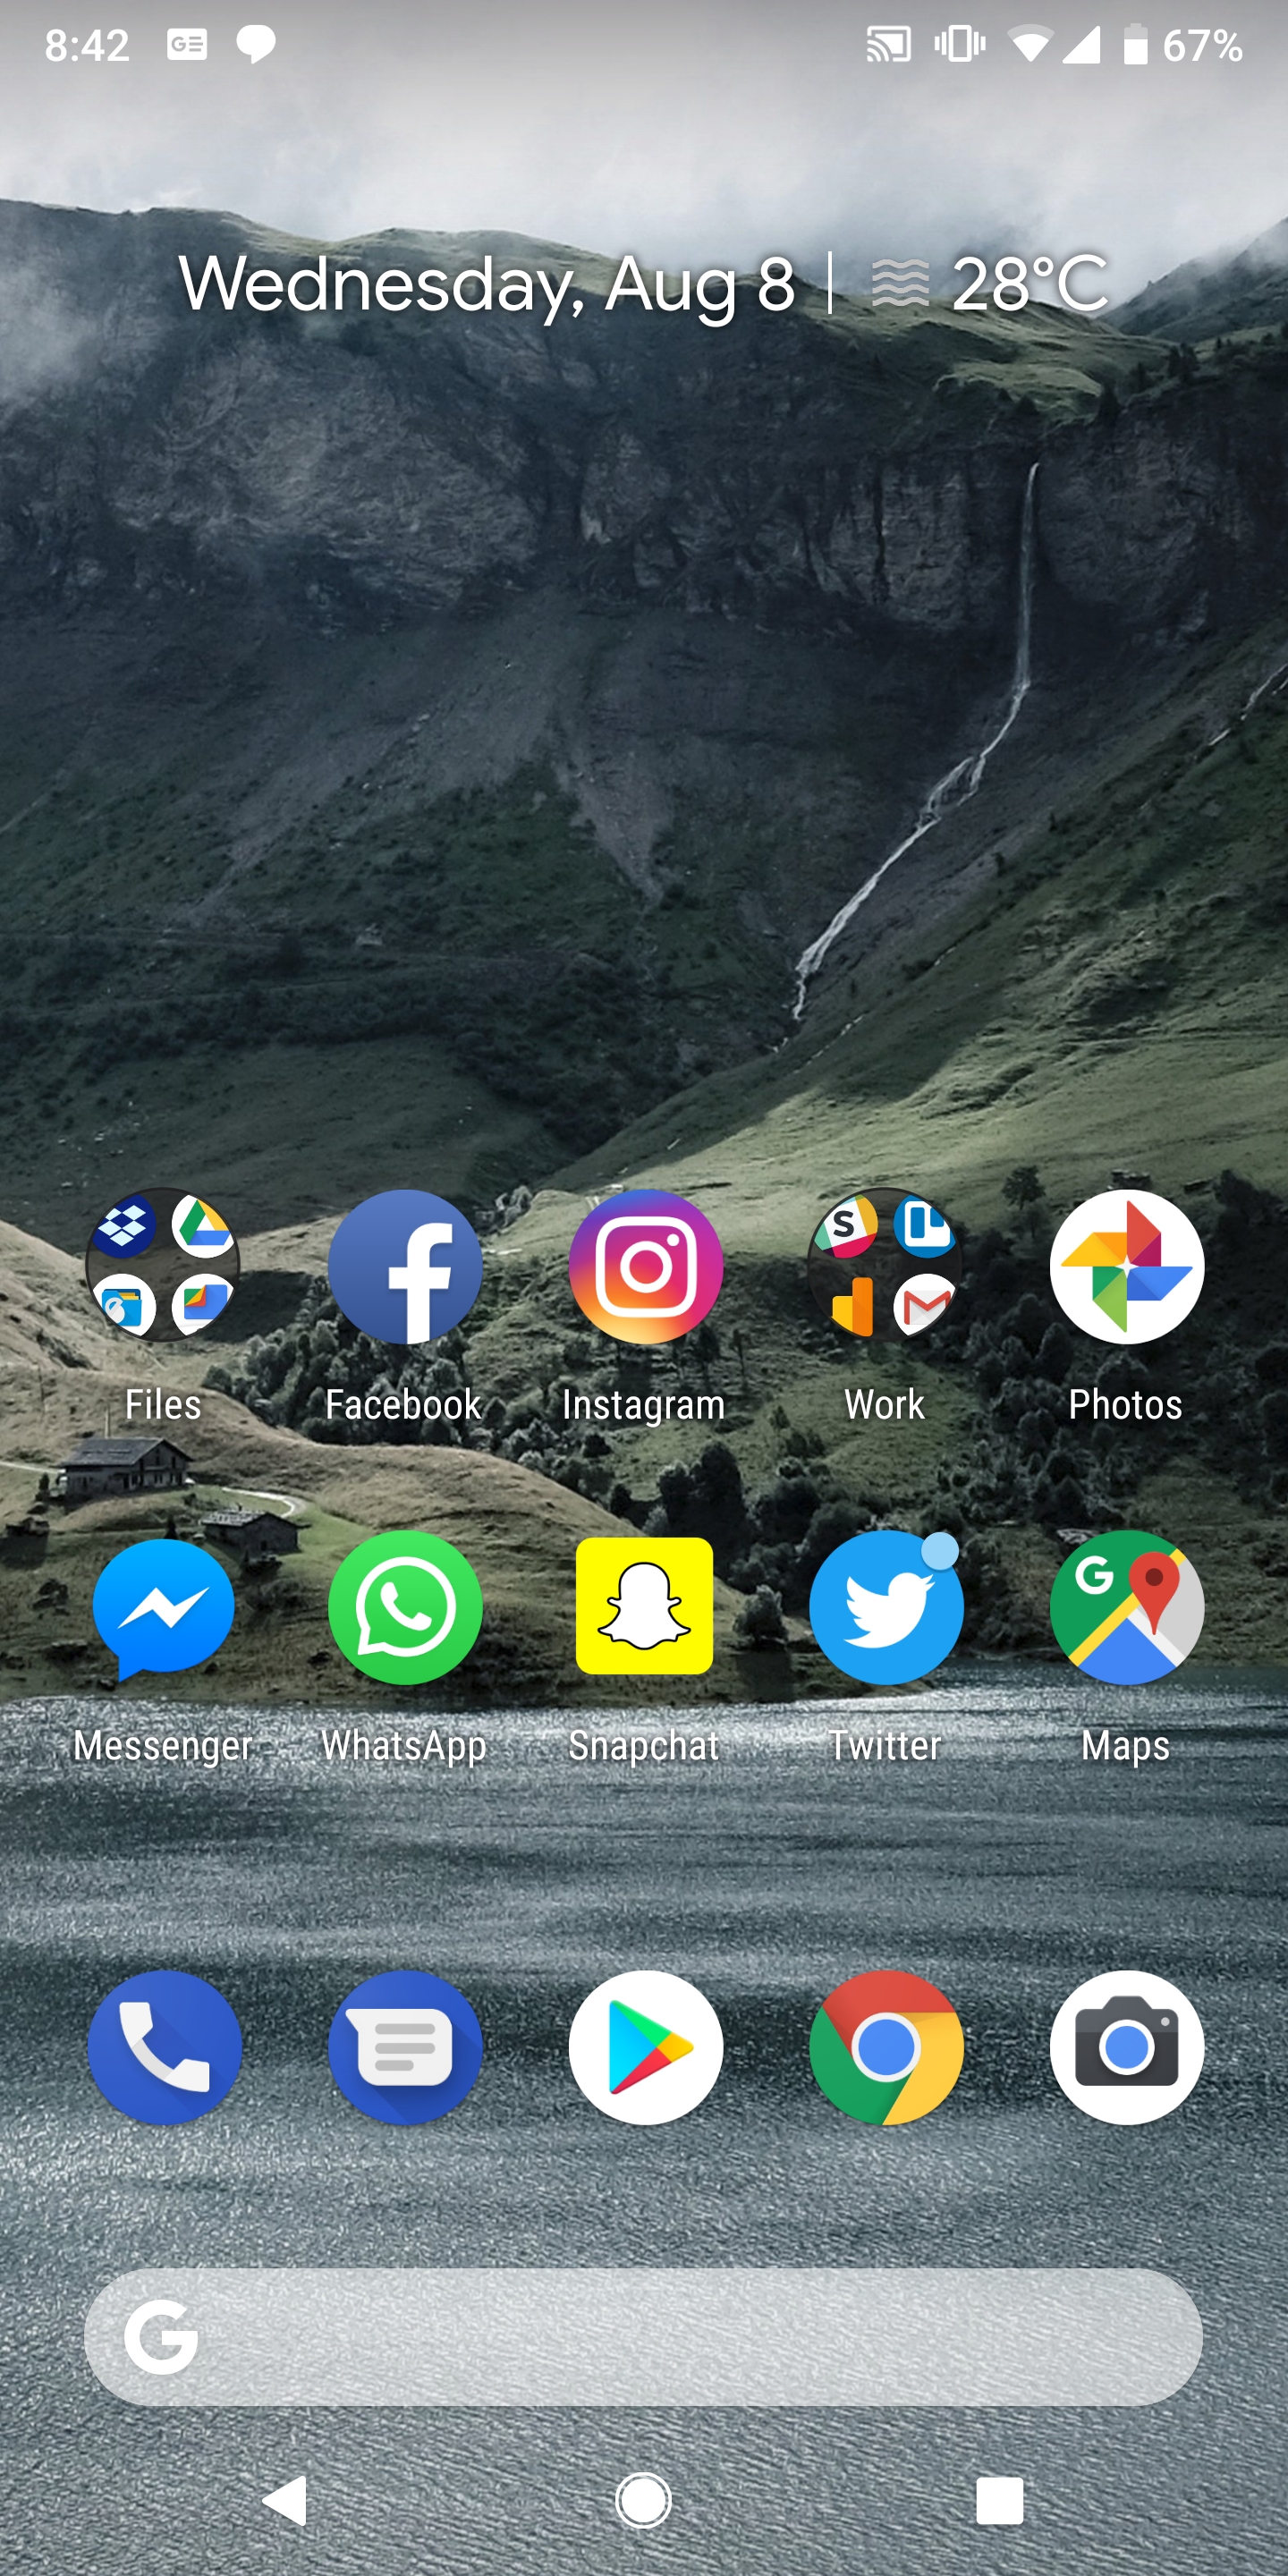 android launcher apk download